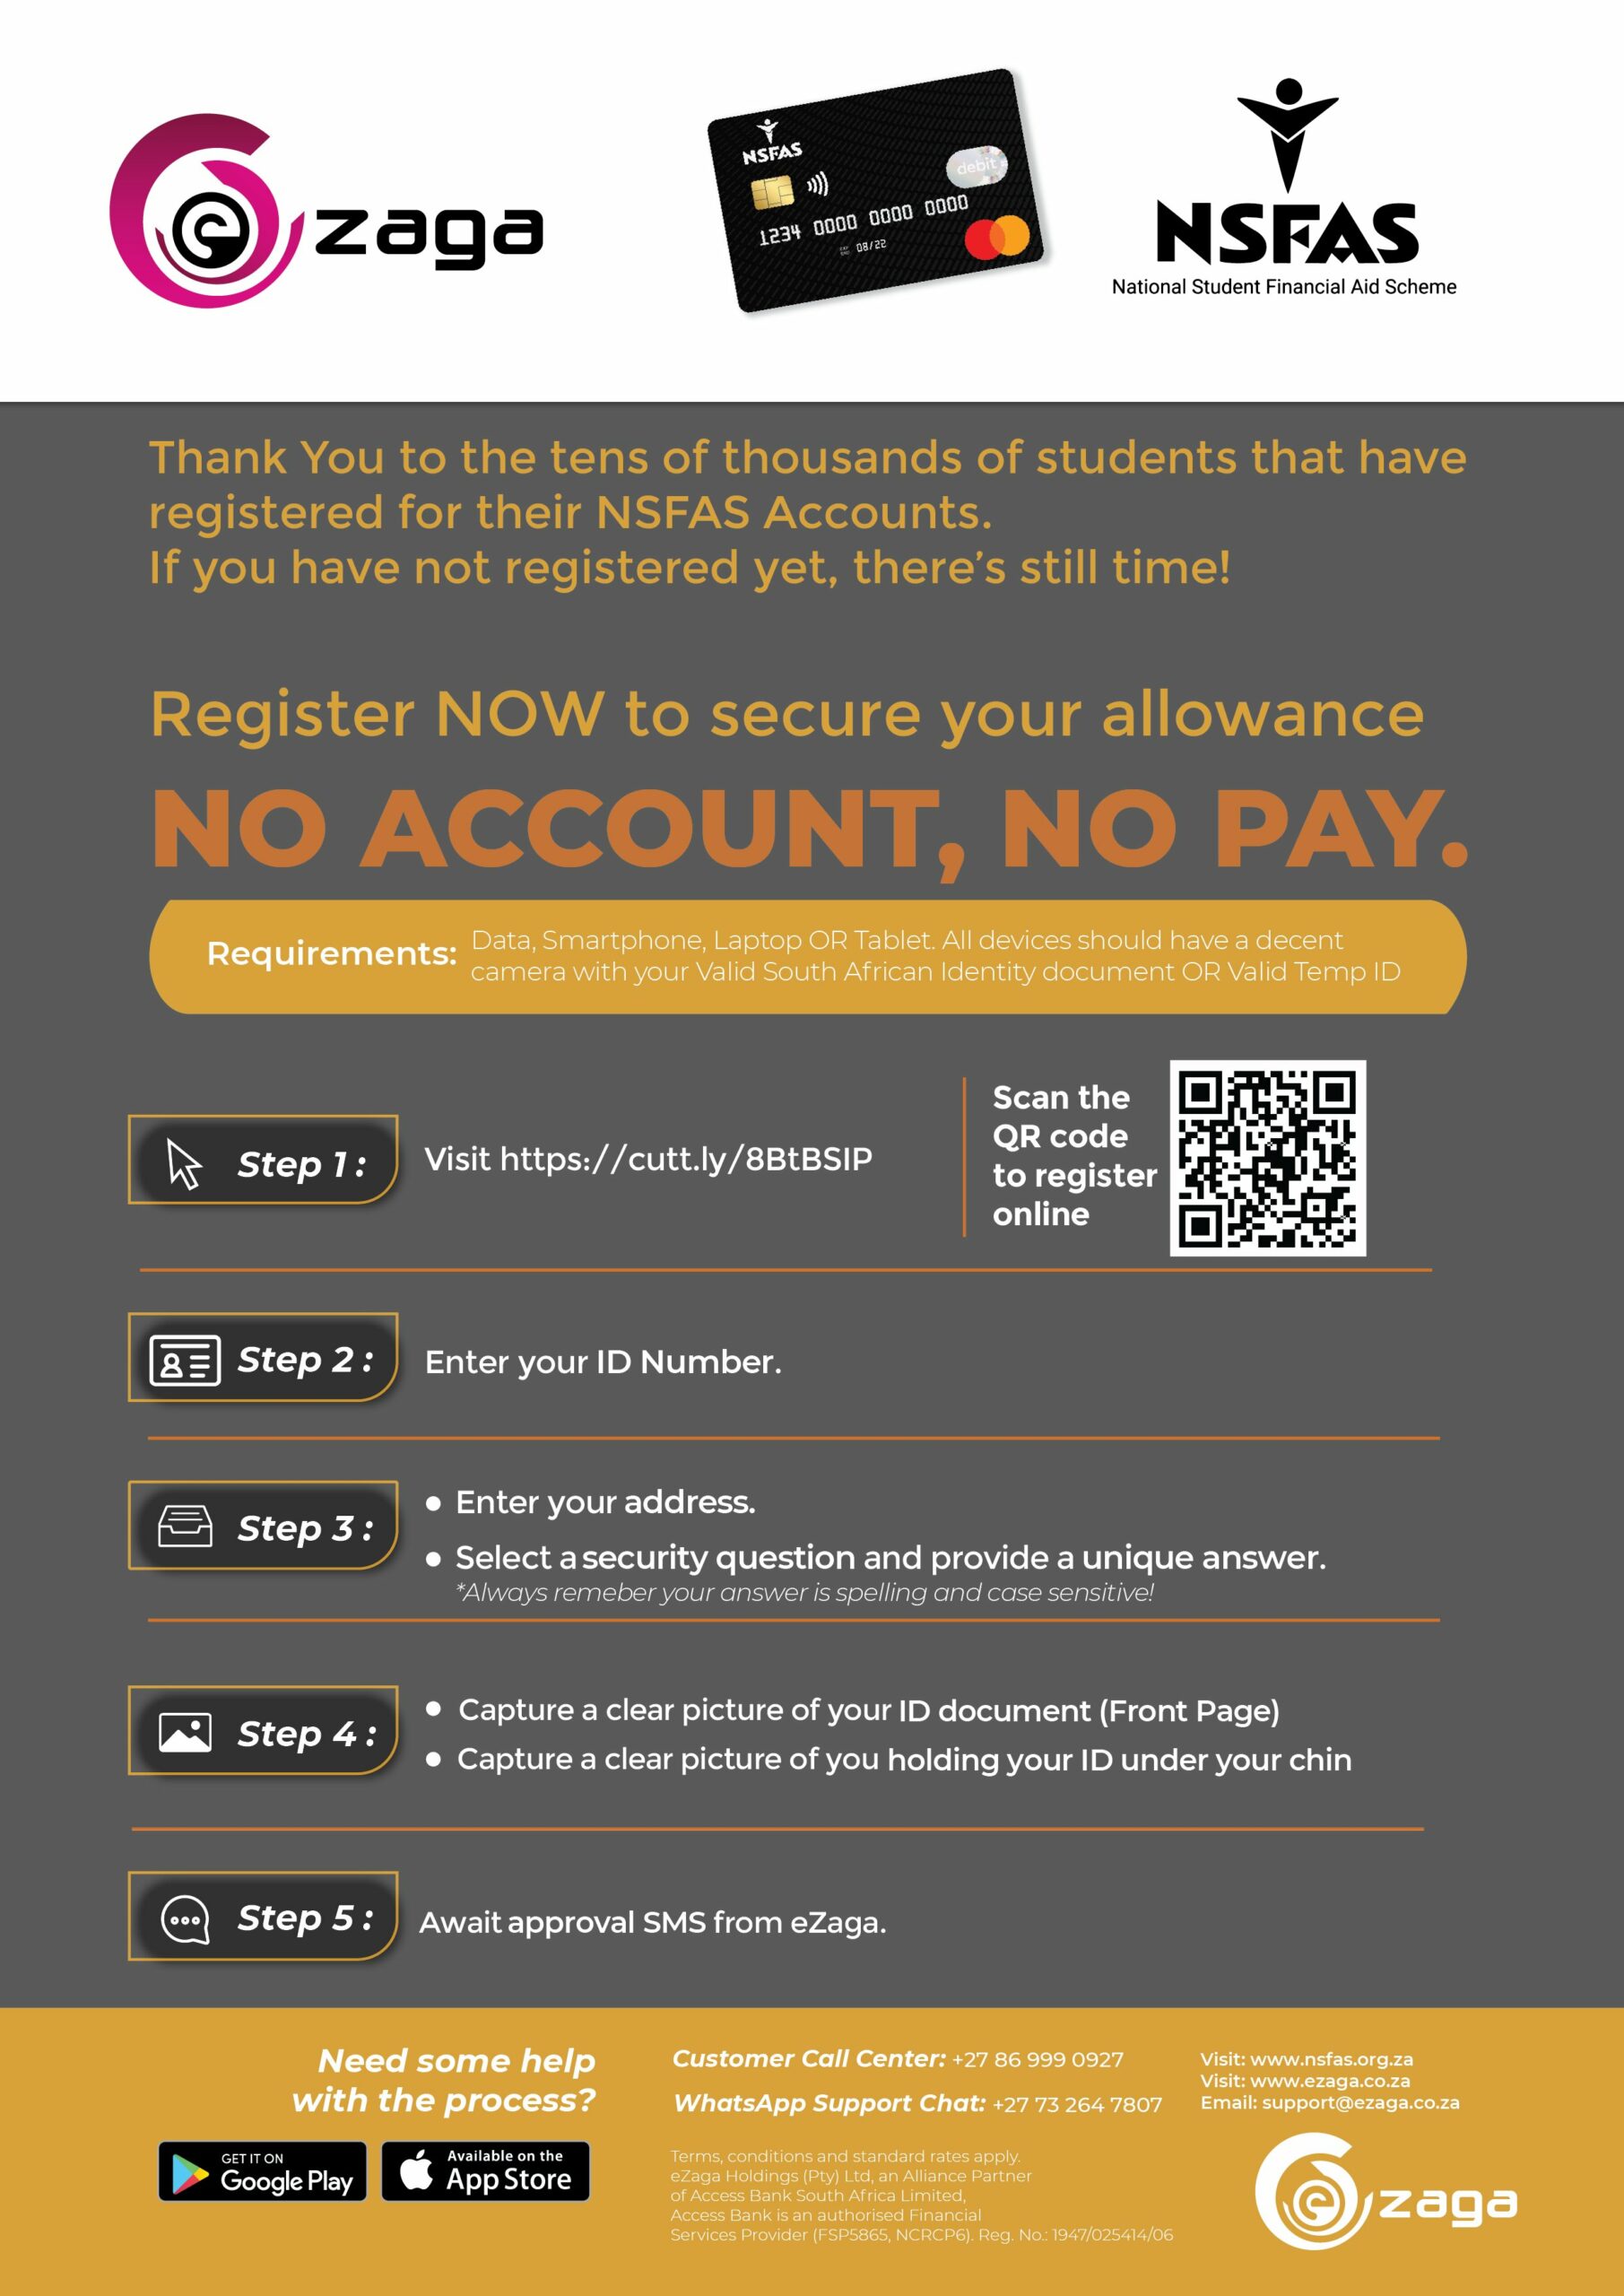 How To Withdraw Cashless With NSFAS Card